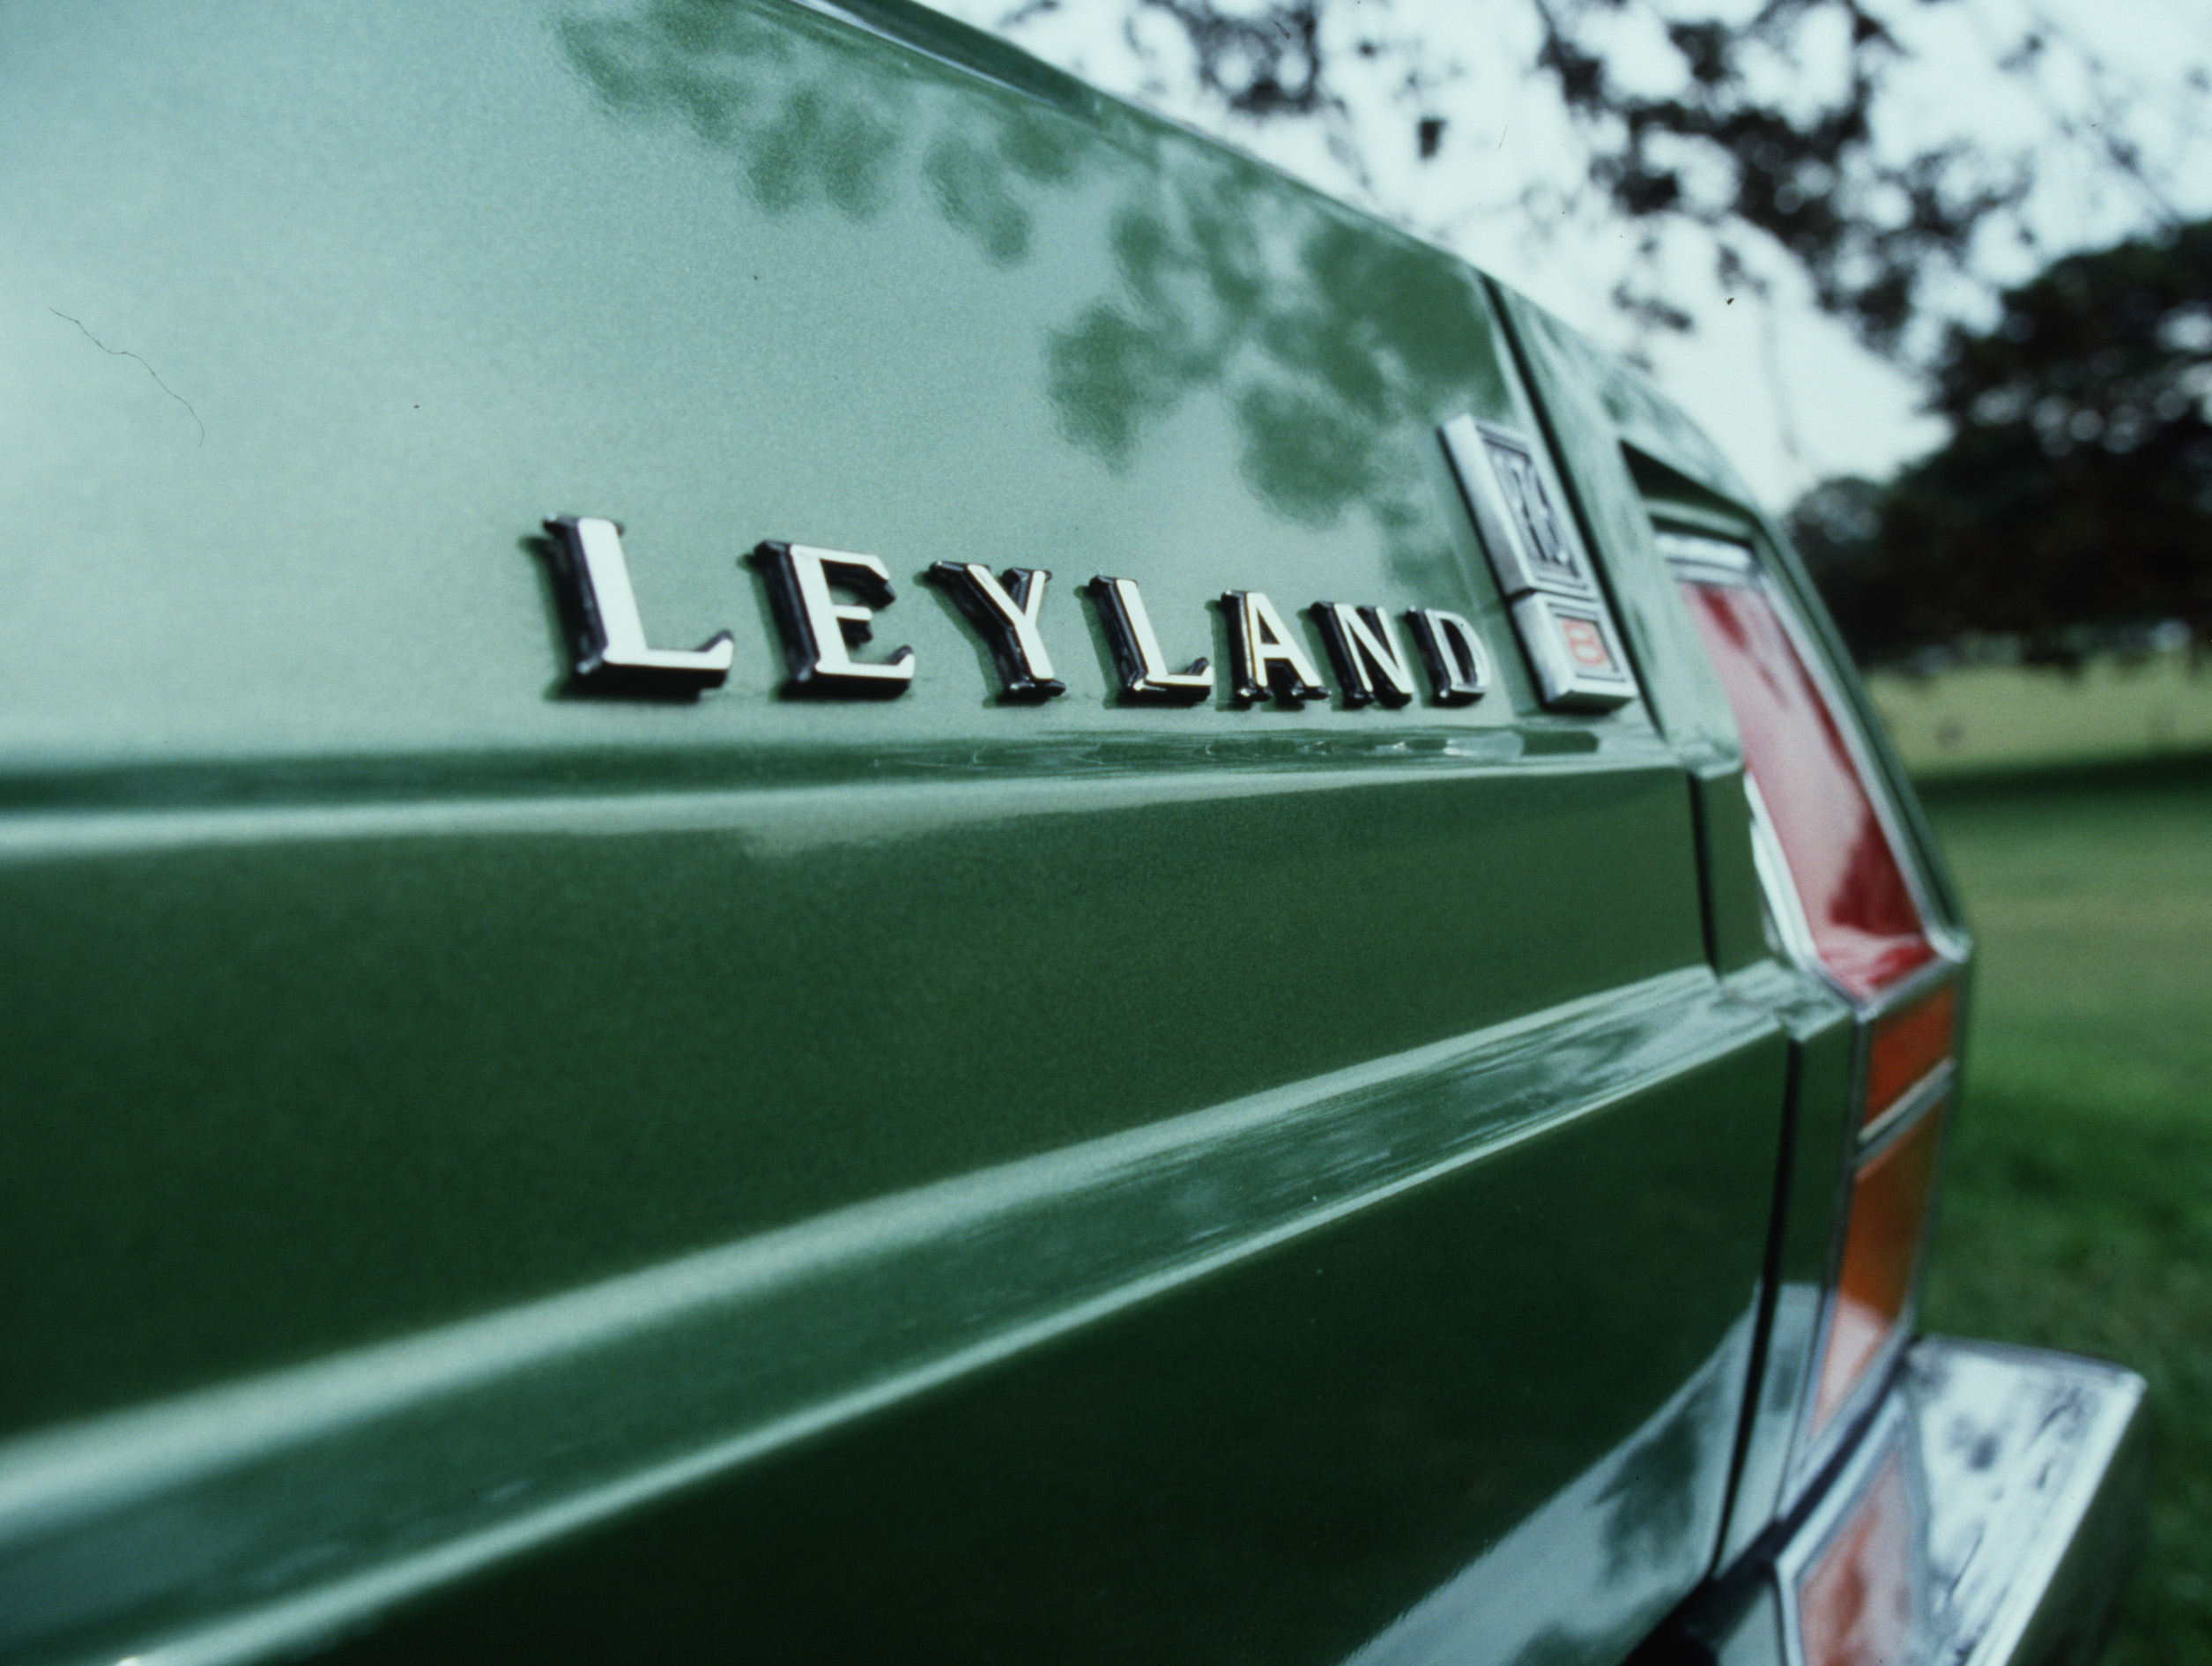 1974 Leyland P76 Super V-8 Saloon with manuals